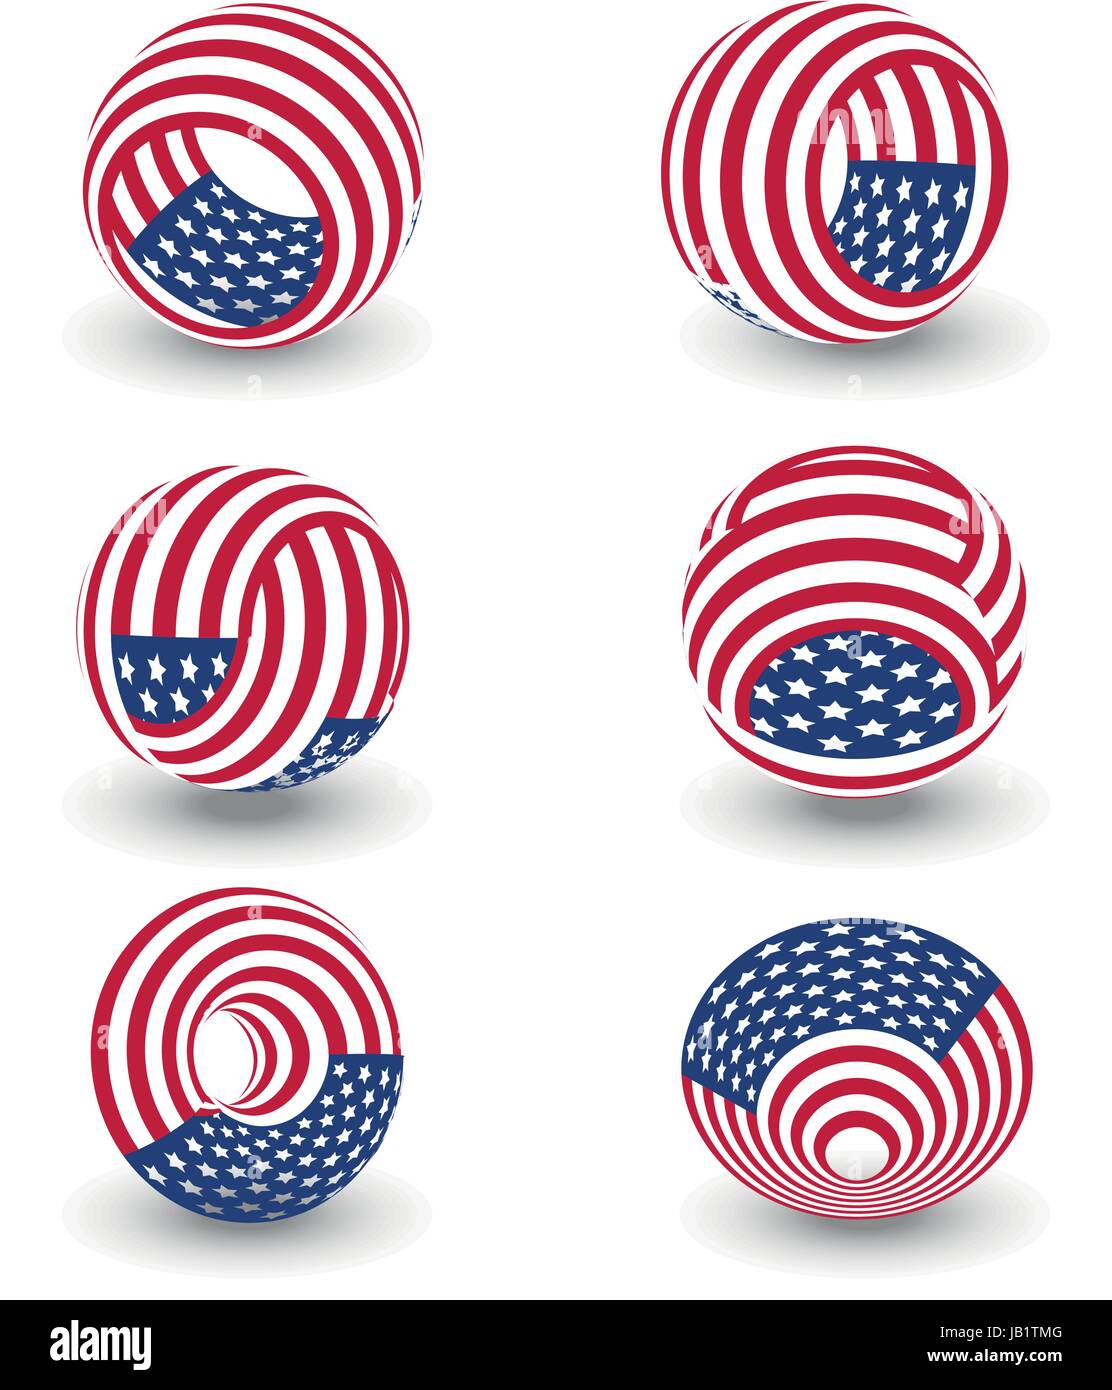 USA twisted circle abstract vector logo. United states symbol set. Independence day 3d vector illustration Stock Vector